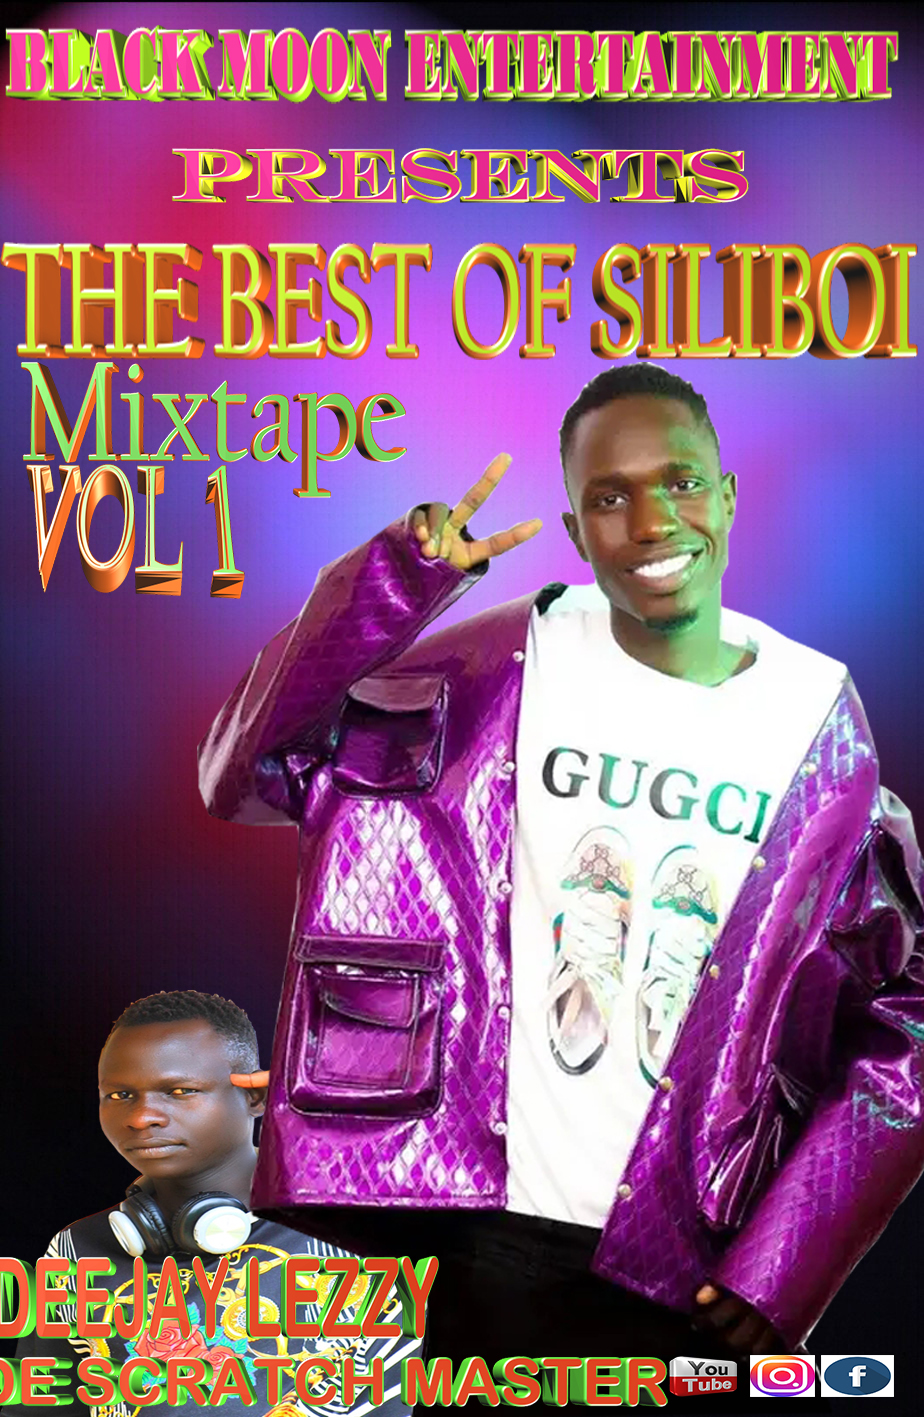 The Best of siliboi